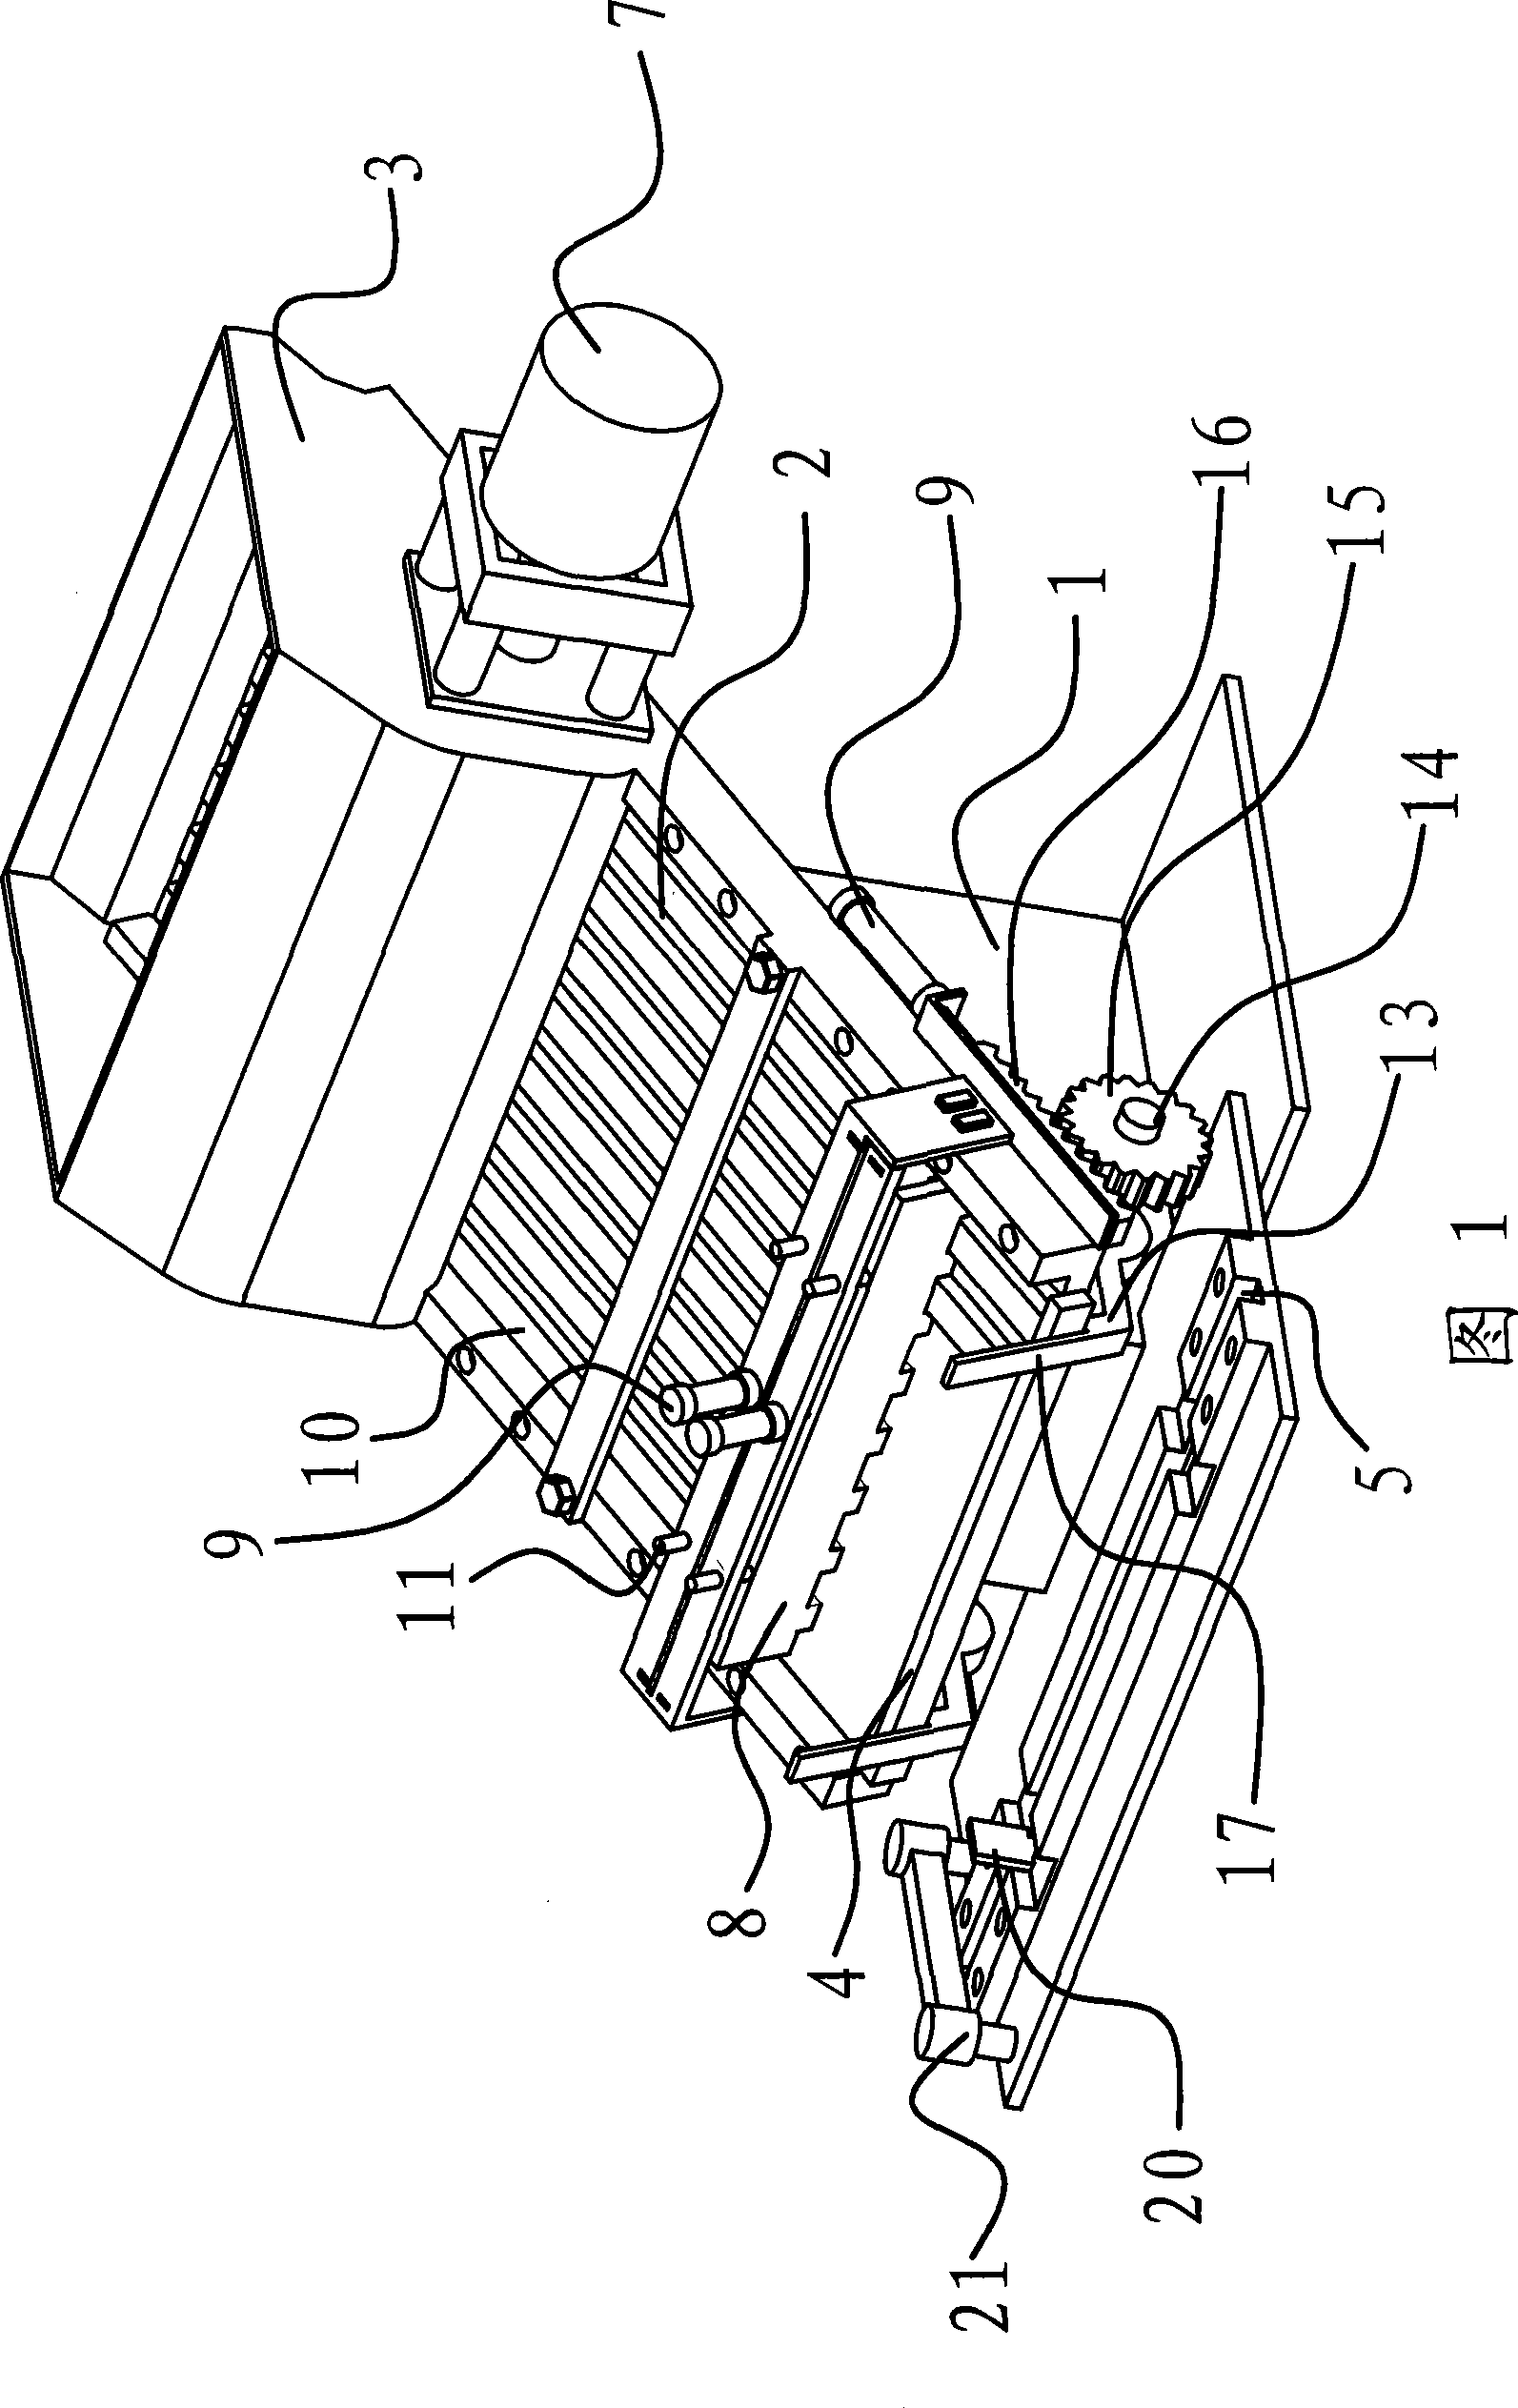 Feed gear of medical needle stand blade distributor